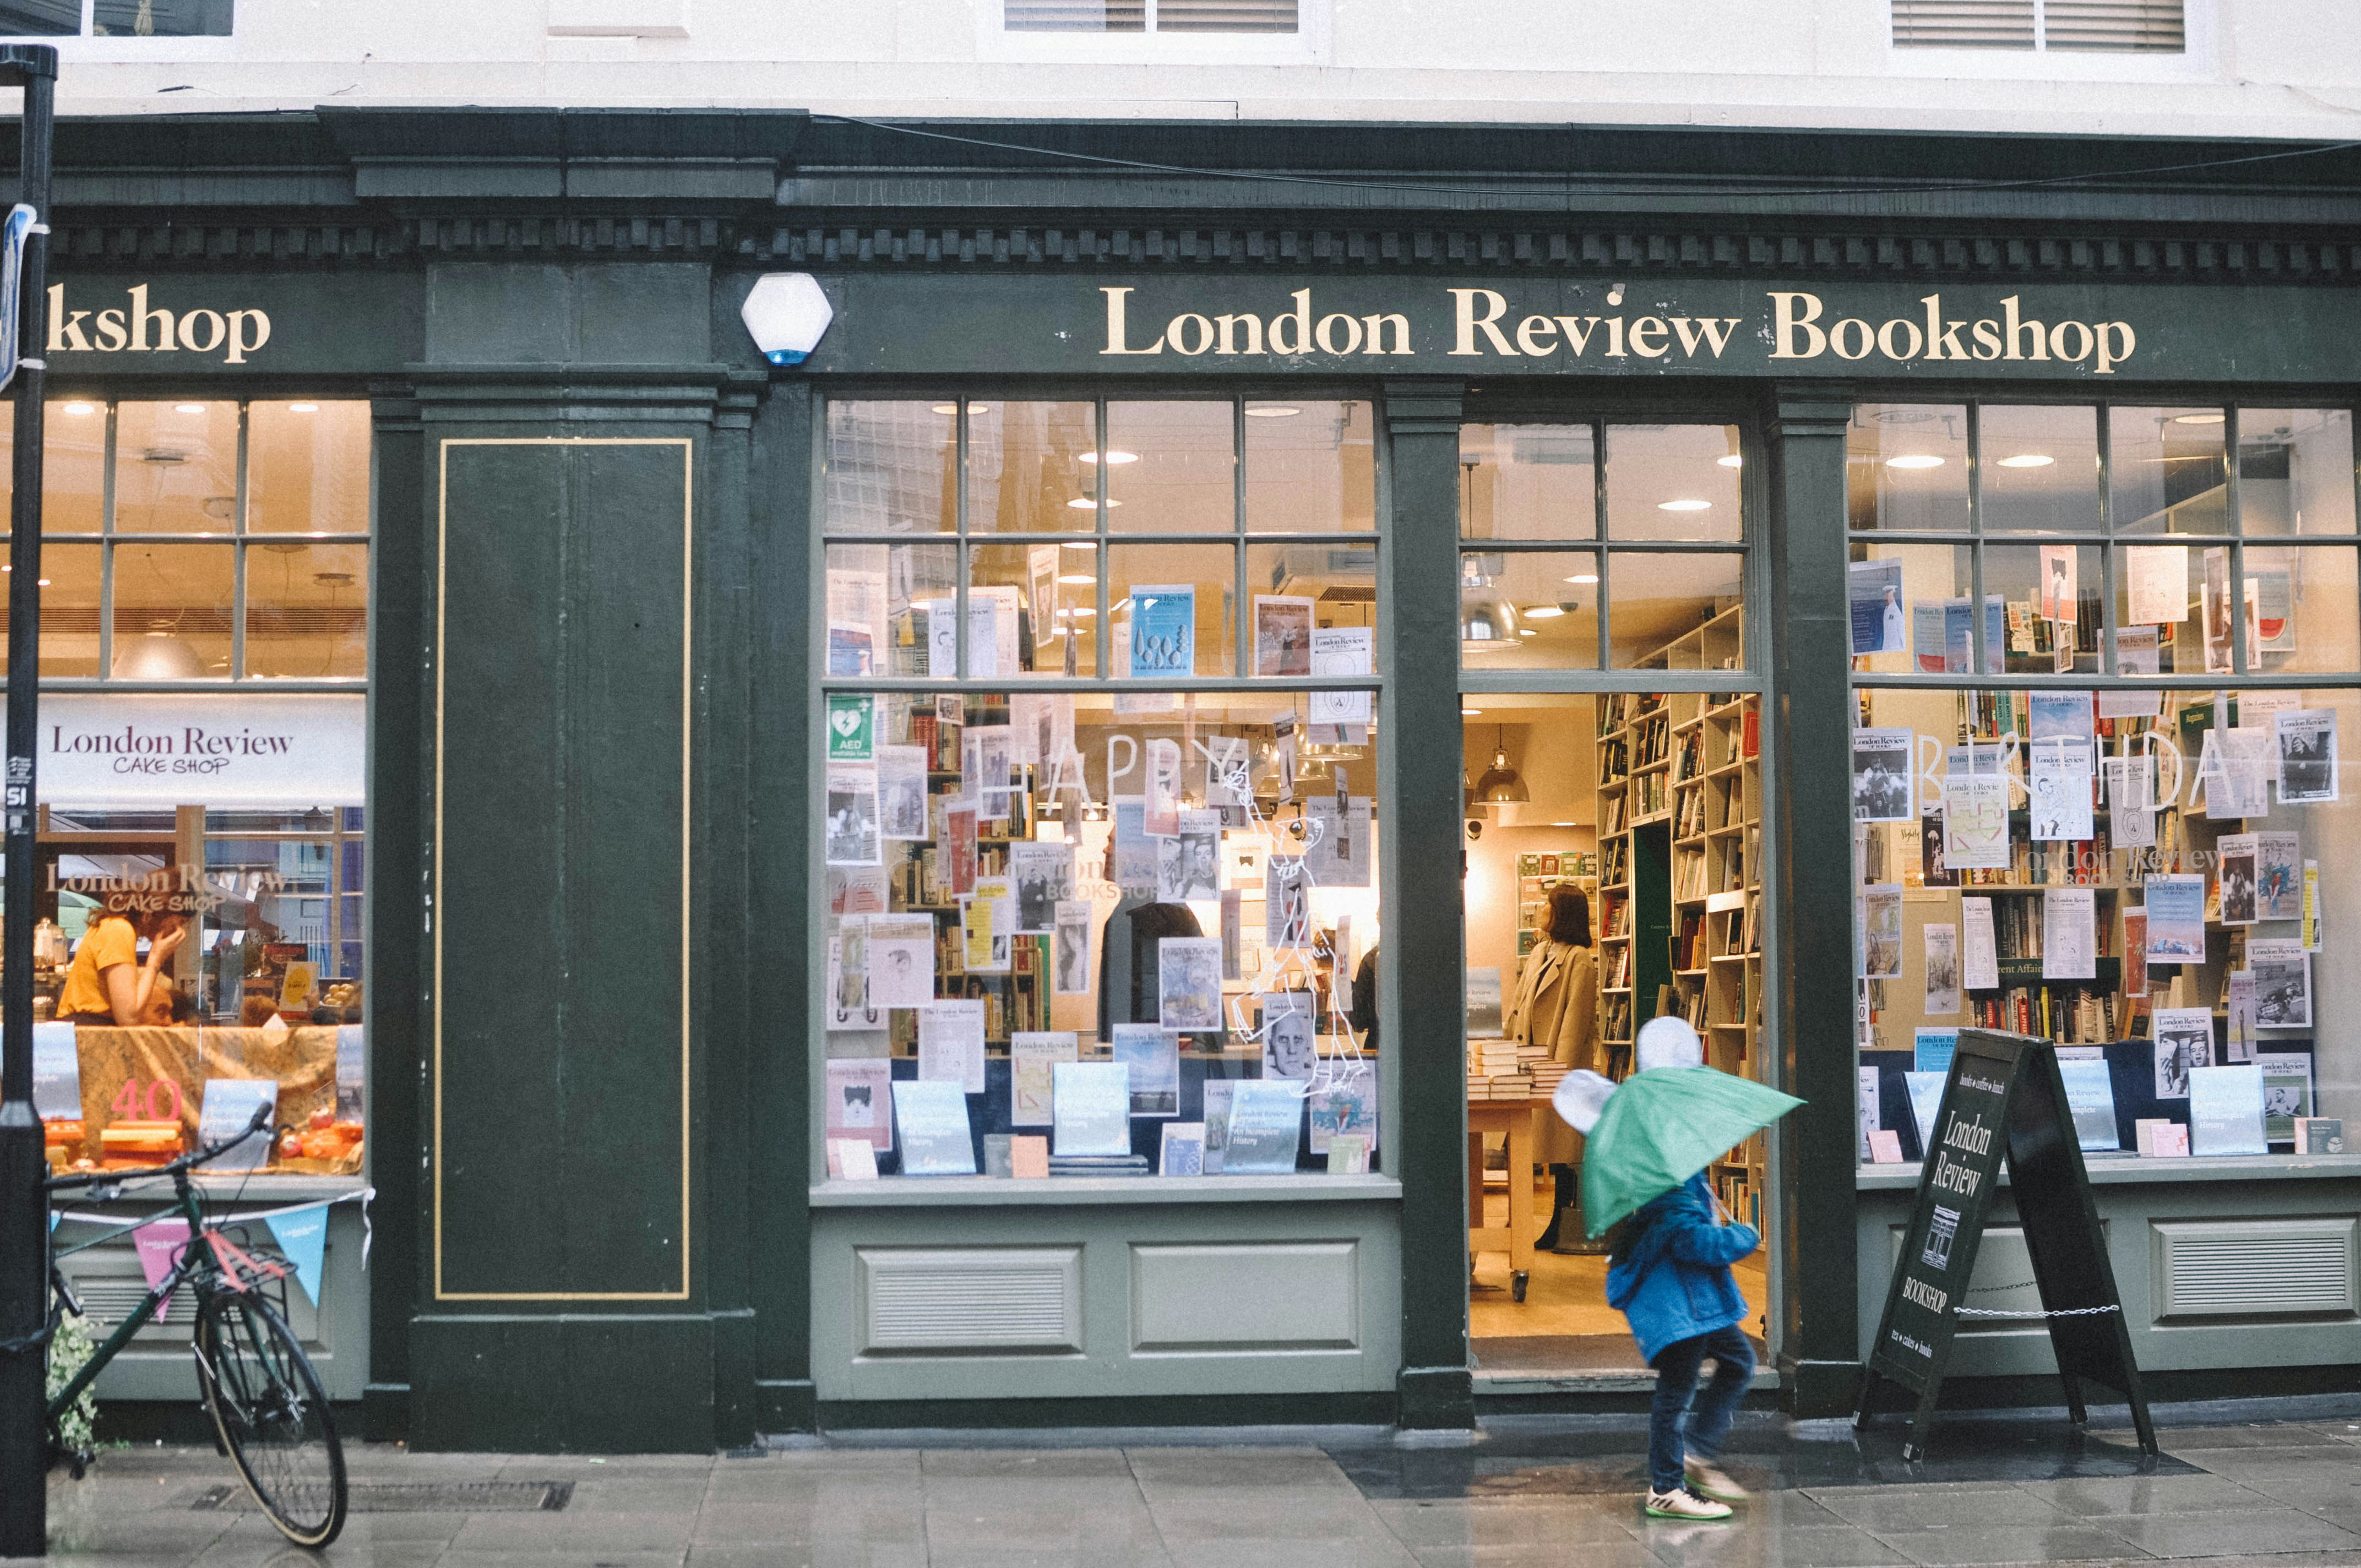 The outside of the London Review Bookshop. It's raining and a child walks past with a green umbrella. The inside of the store is lit up in a warm yellow and there are customers inside.